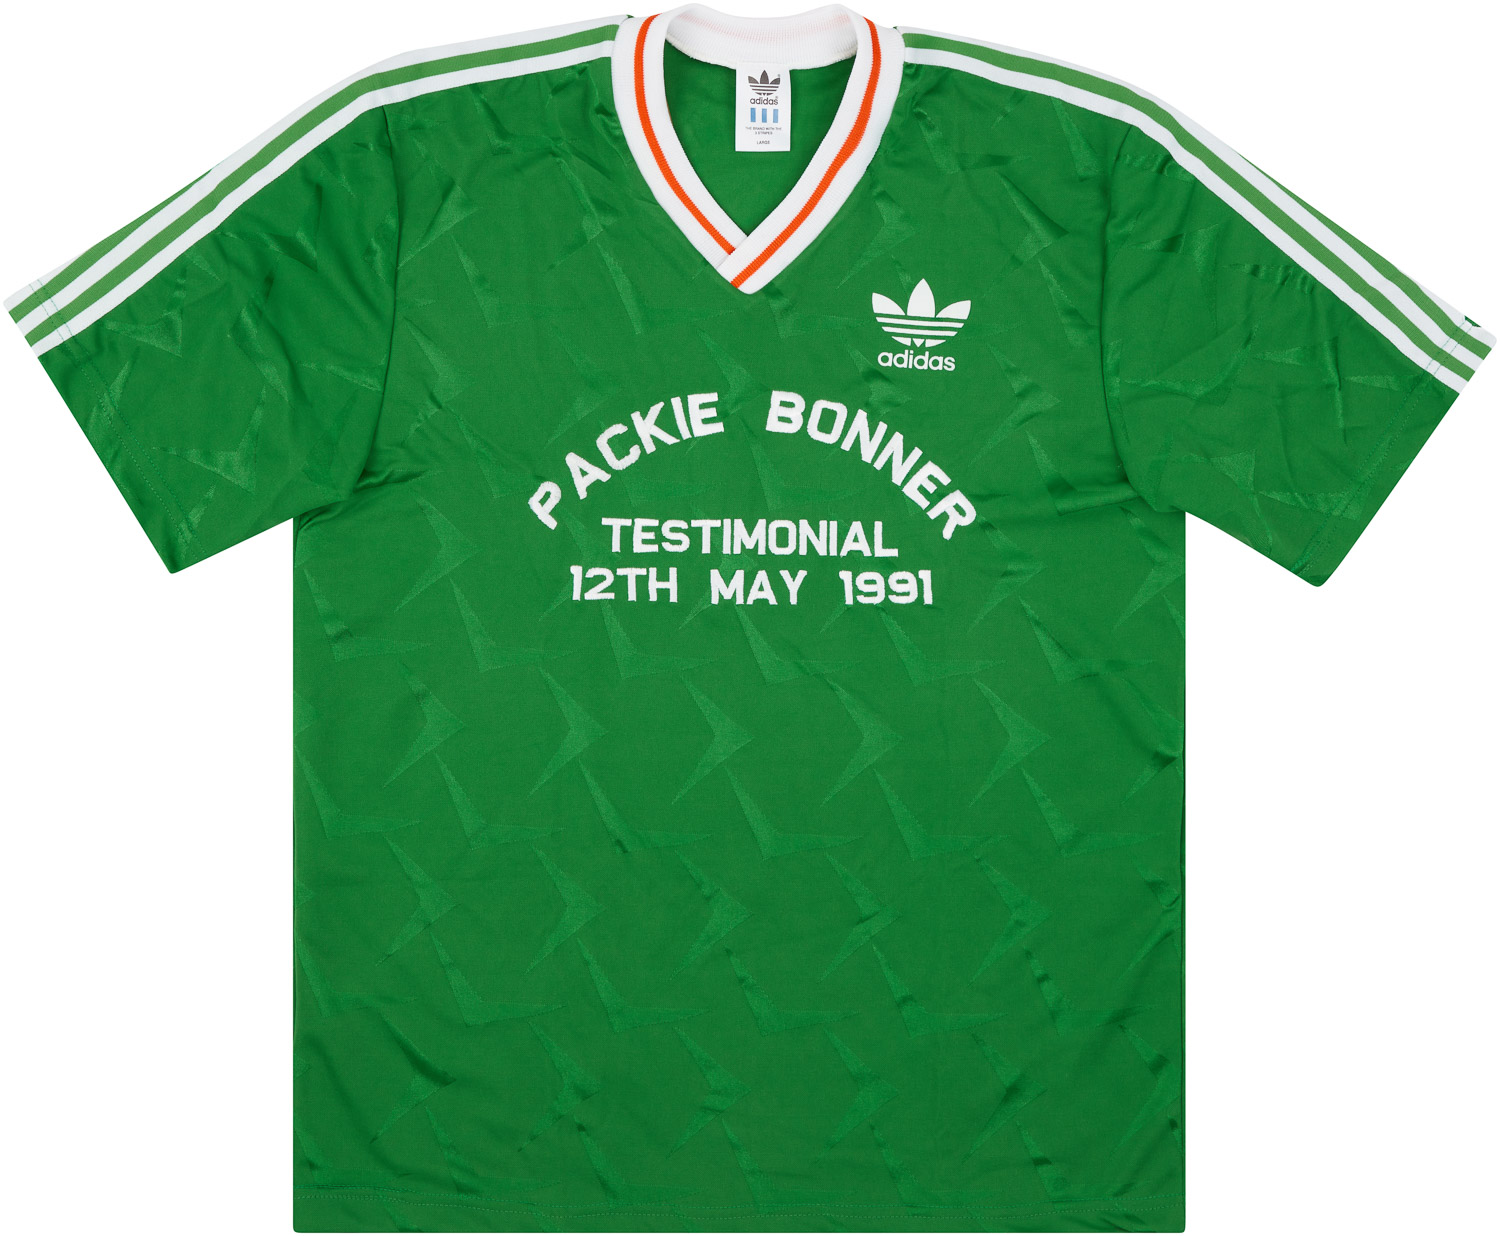 1991 Republic of Ireland Player Issue Packie Bonner Testimonial Home Shirt - 10/10 -